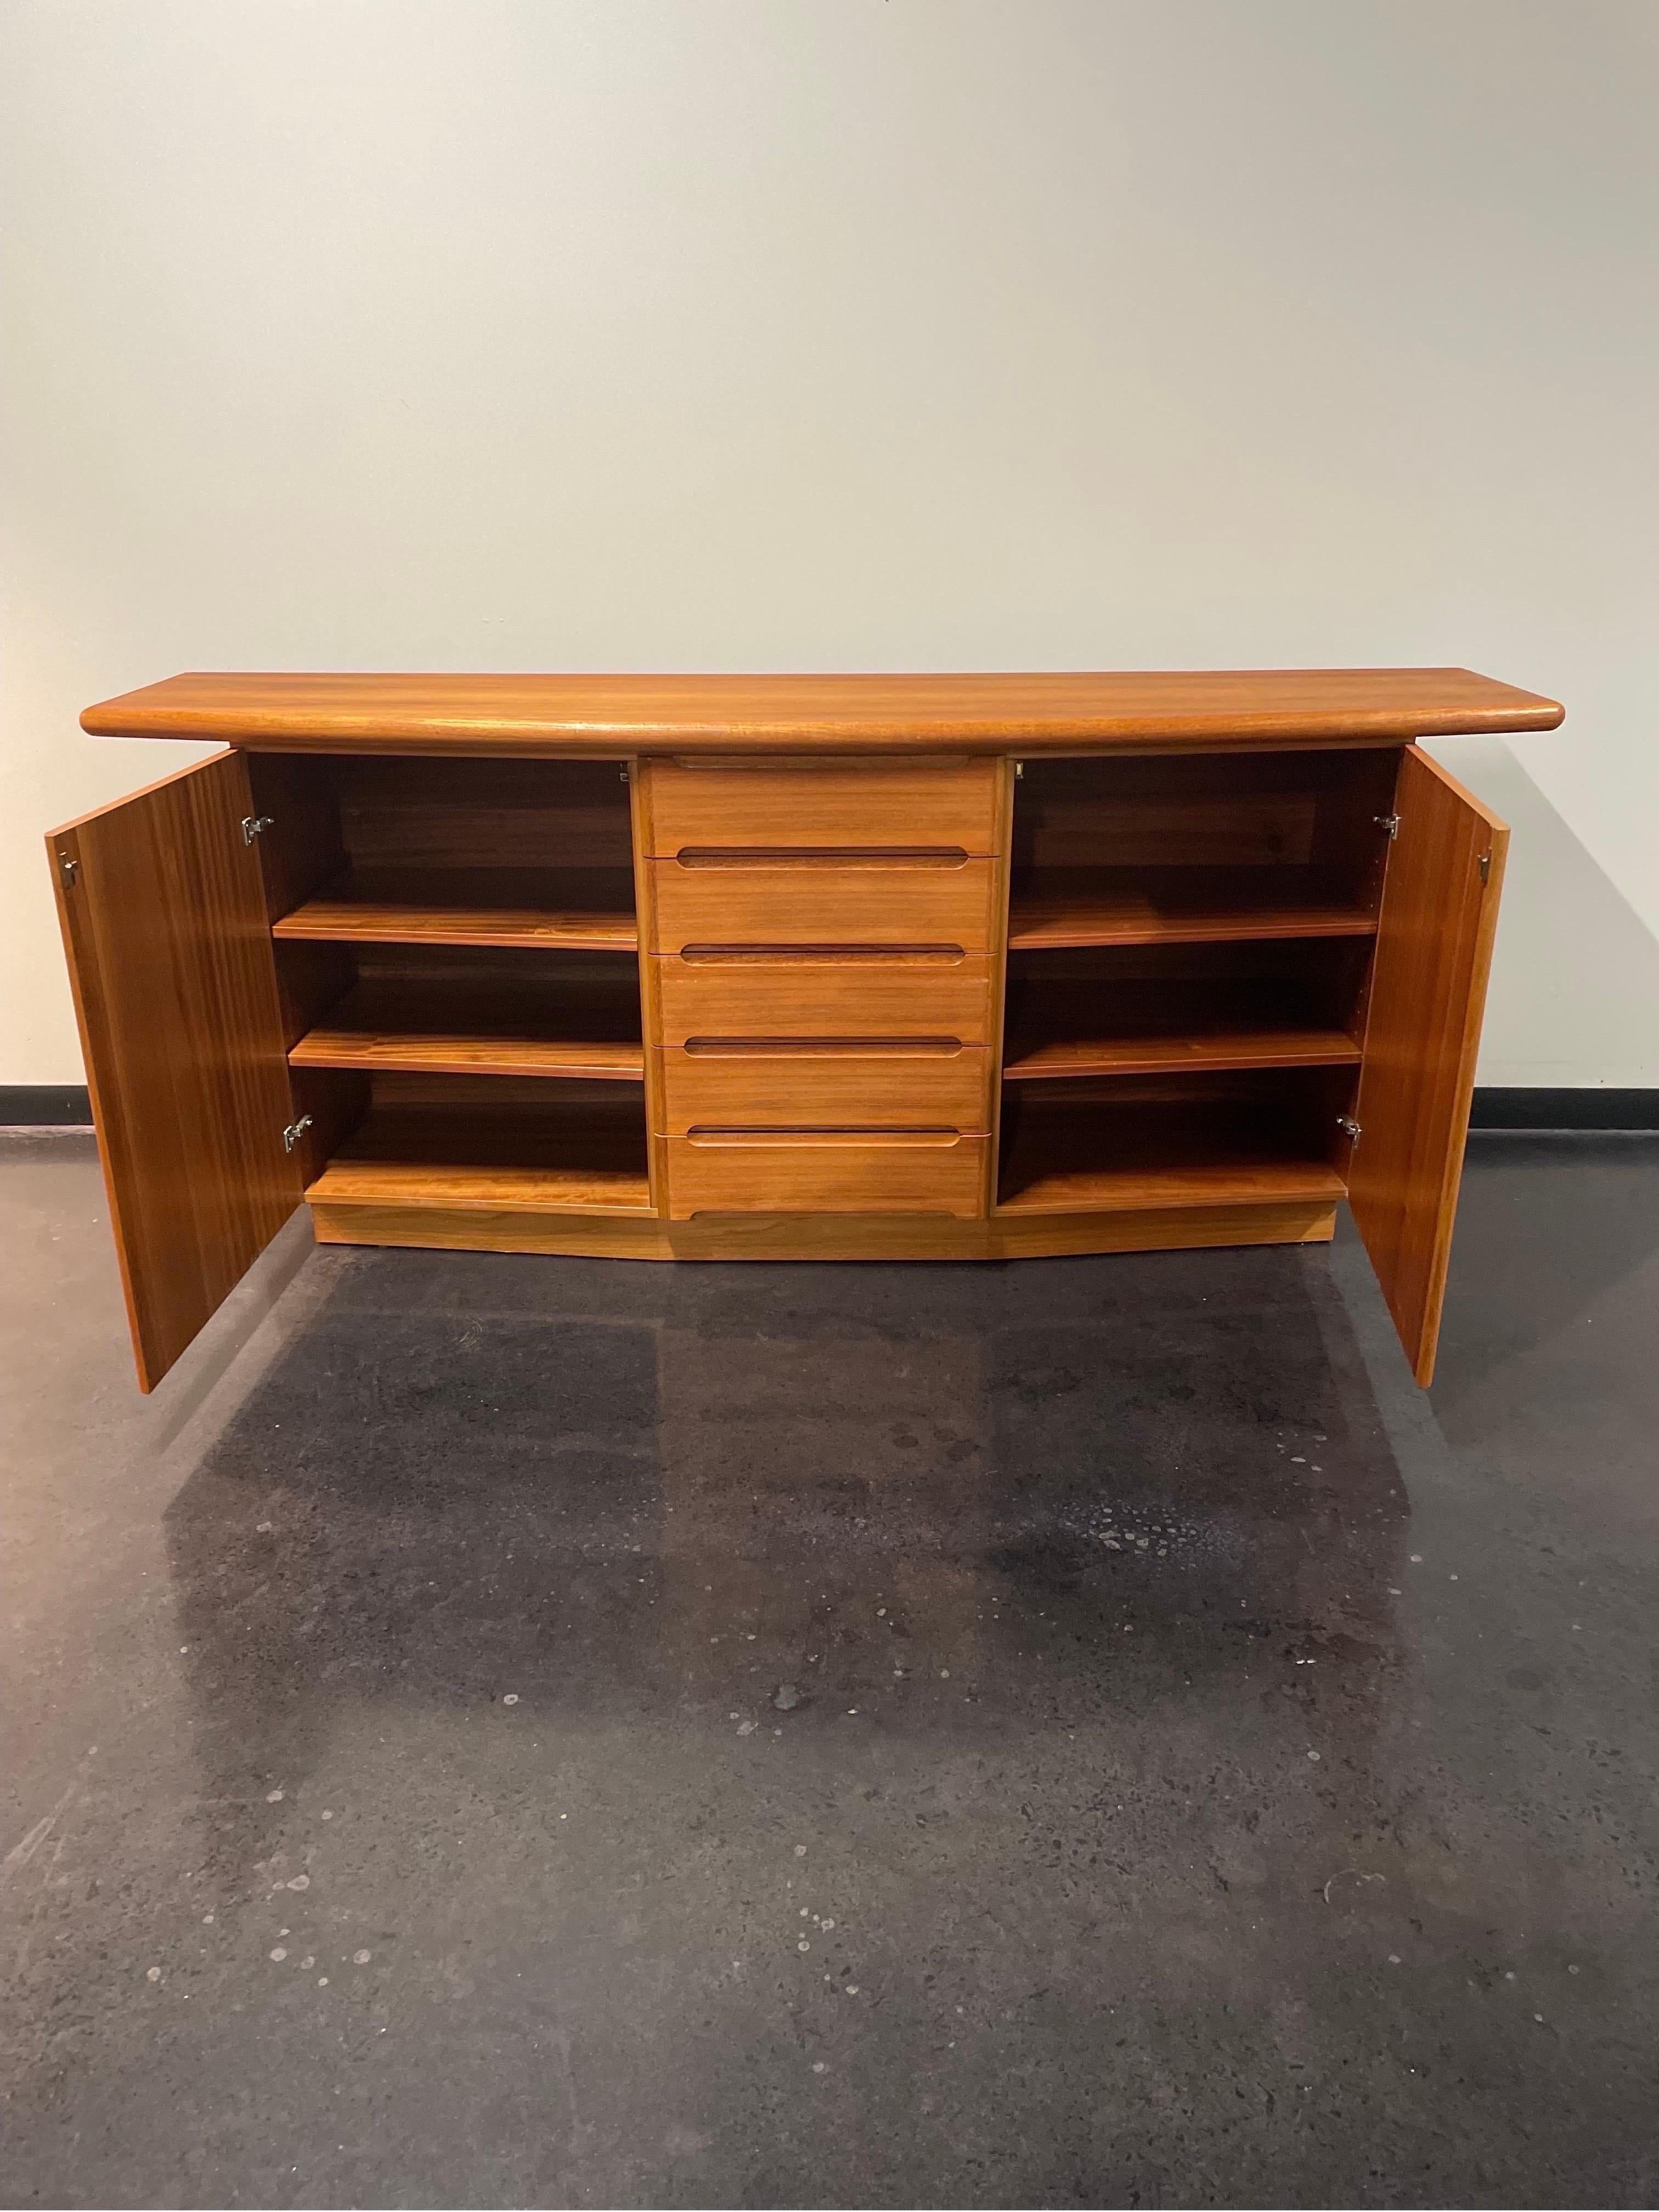 Danish modern sideboard/credenza by Skovby made out of teak wood and featuring 5 drawers and 2 storage areas.